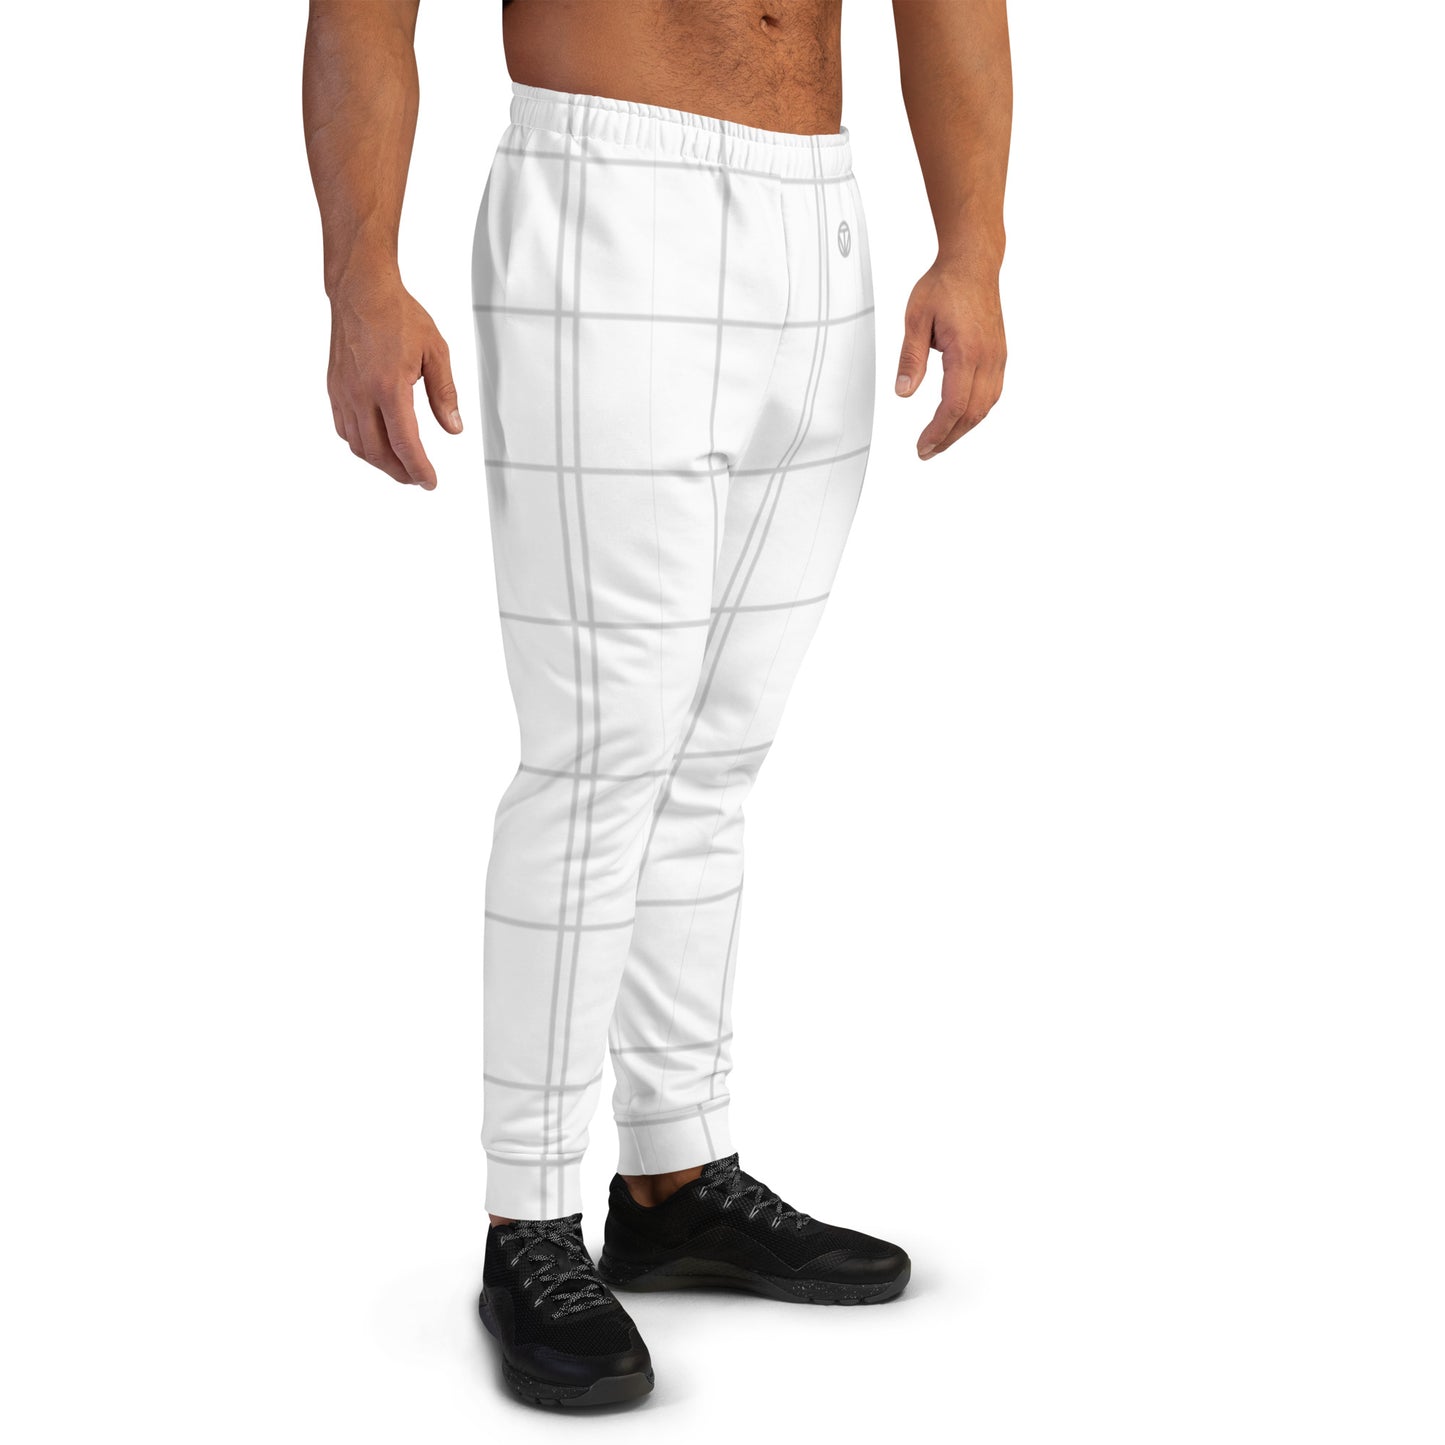 TIME OF VIBES - Men's Joggers LINEUP (White) - €69.00